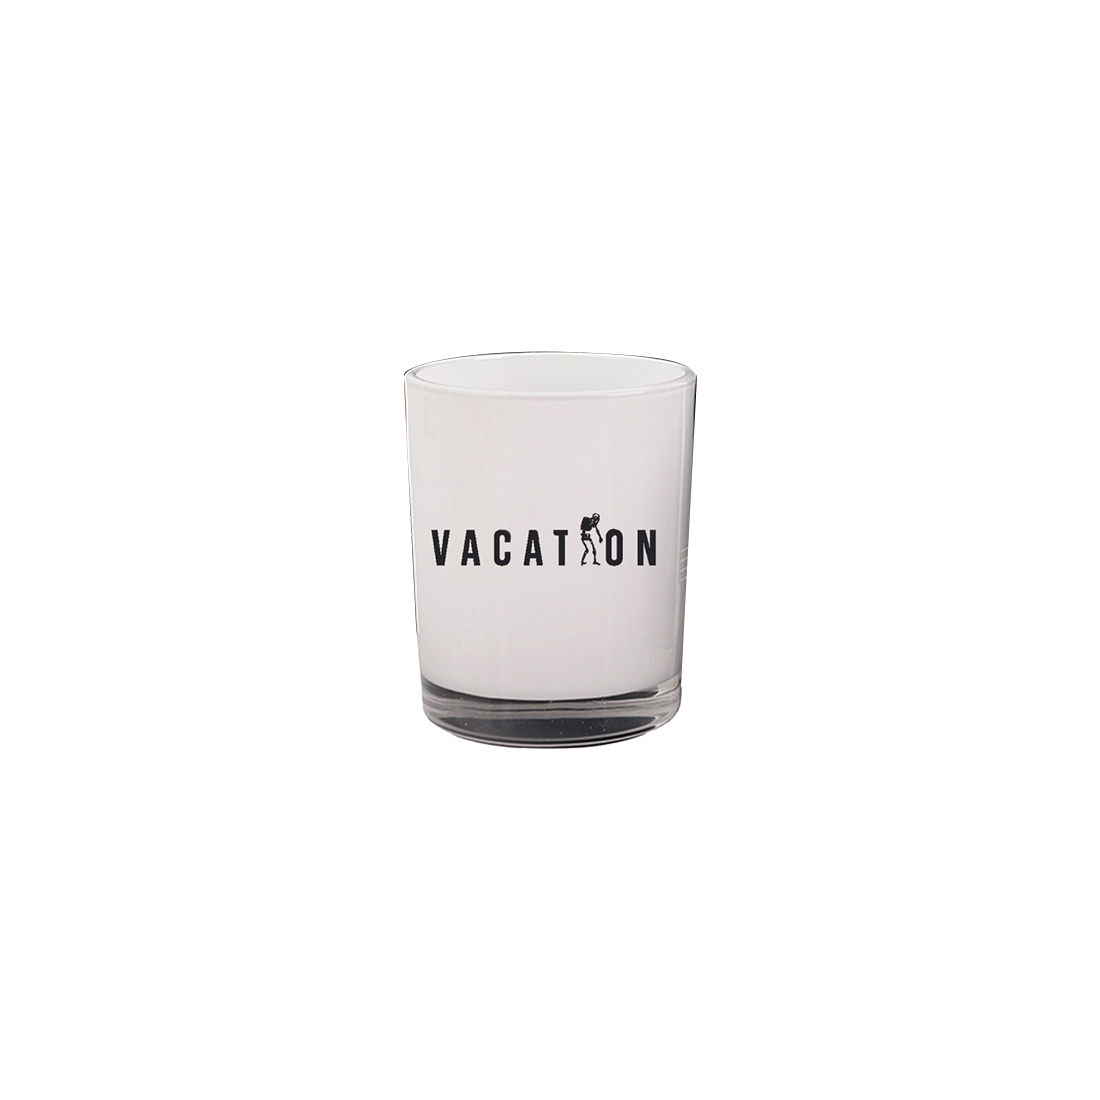 Vacation Candle